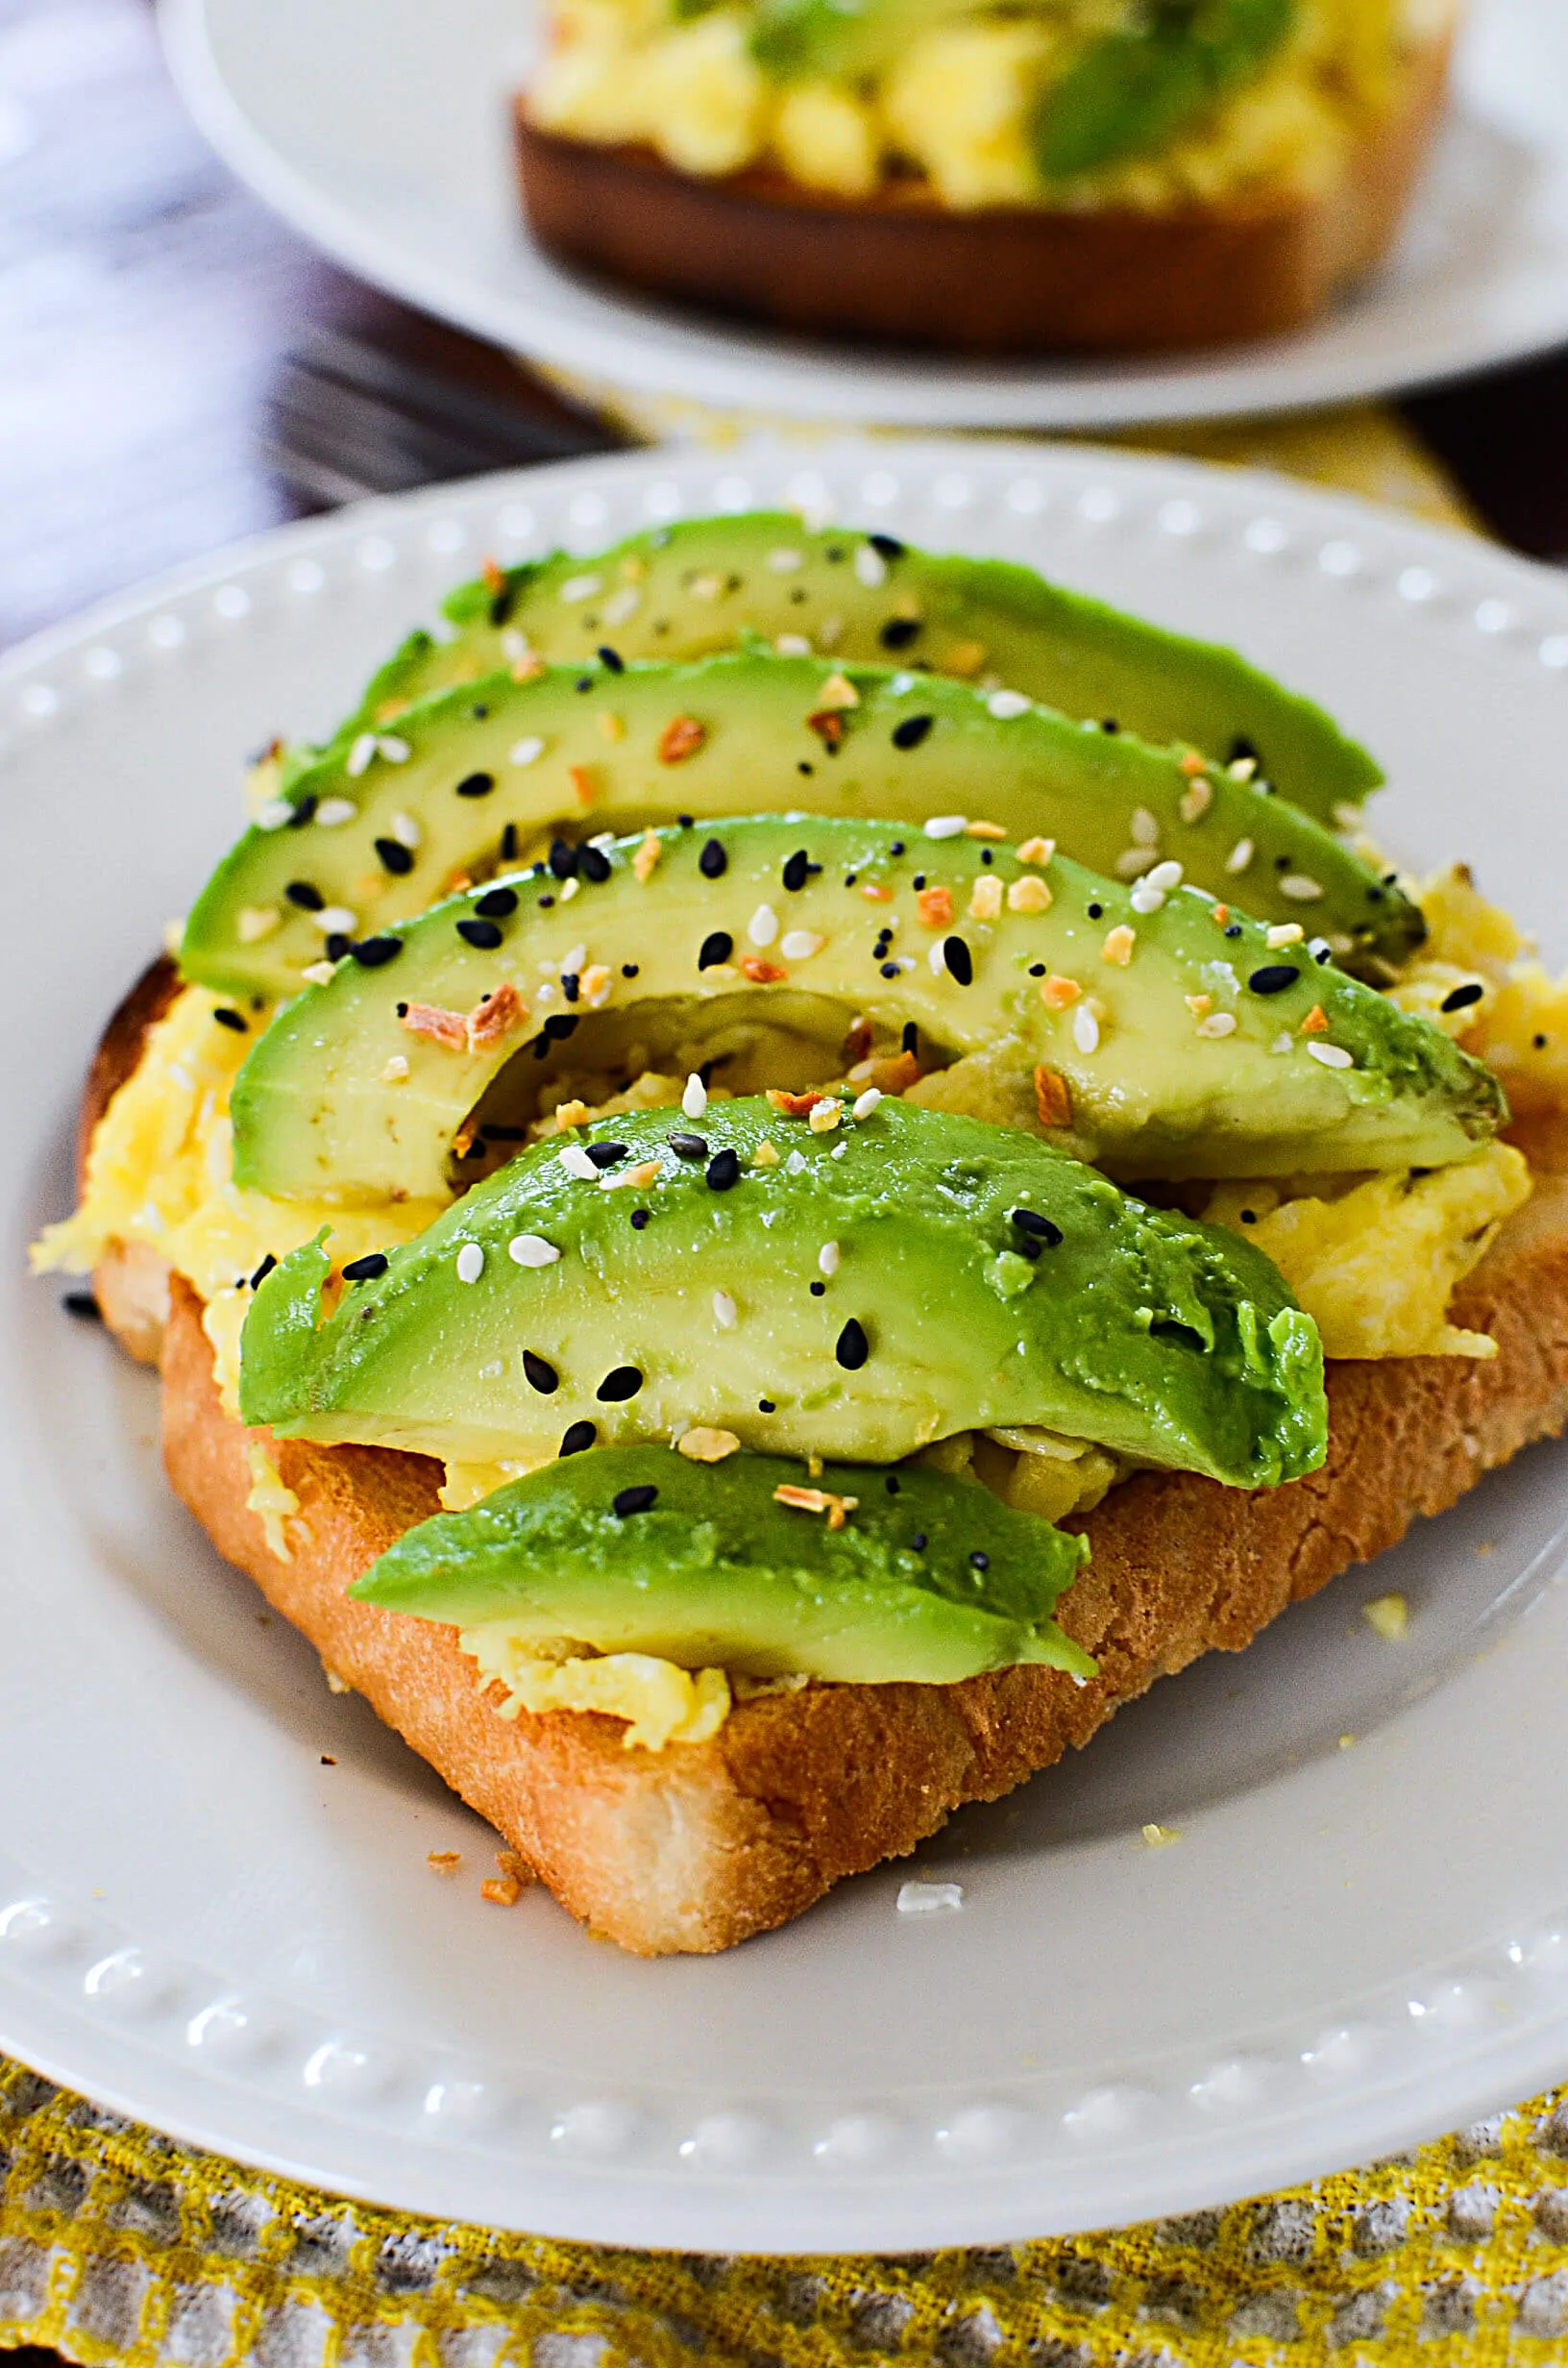 This recipe for simple avocado toast is easy, quick and super delicious! This is the best avocado toast for when you want to eat healthy but still have a quick morning breakfast!